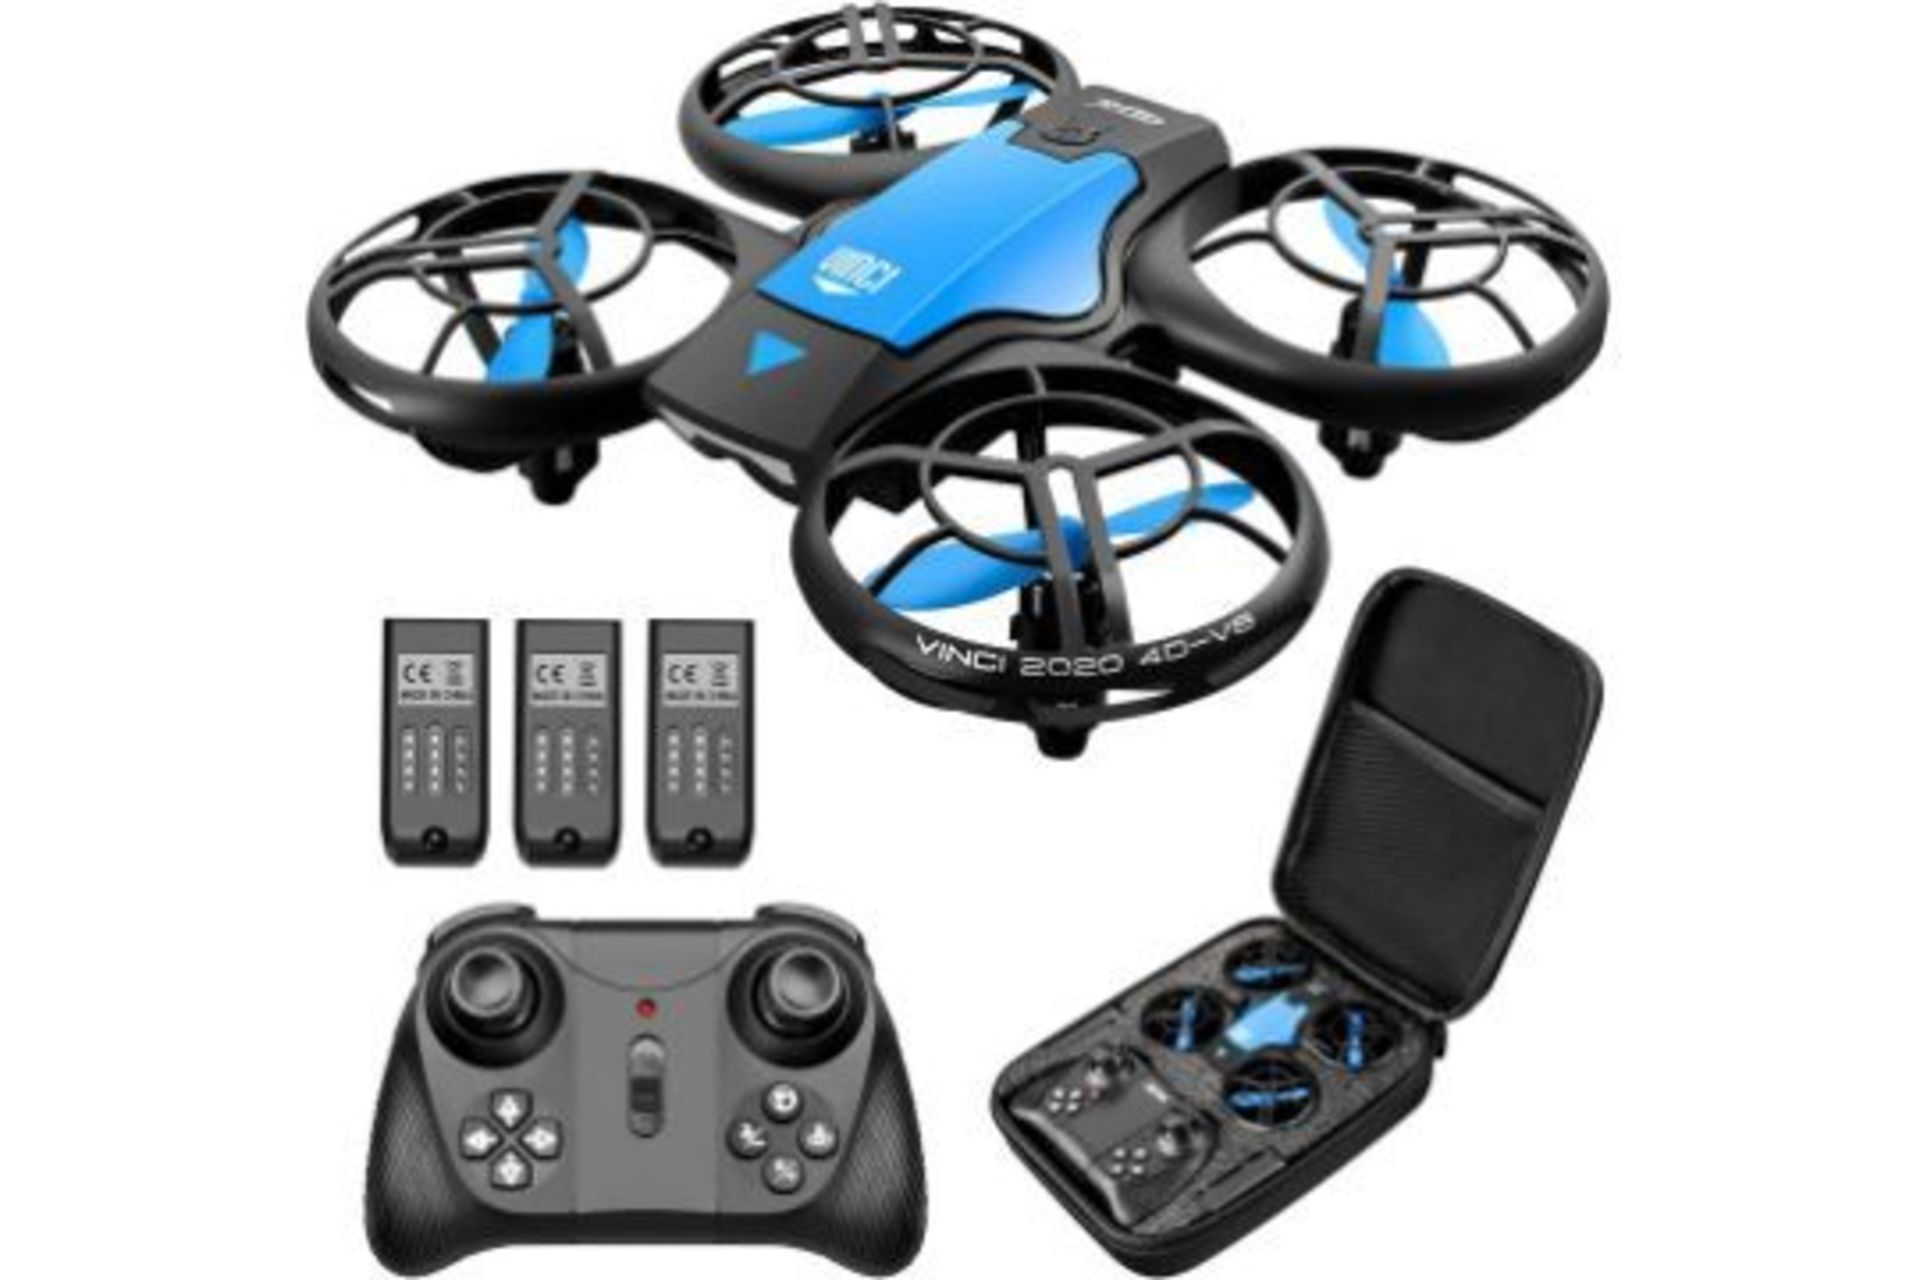 5 X 4DRC Mini Drone for Kids Hand Operated RC Quadcopter Longer Flight Time, (4DV8) Altitude Hold,